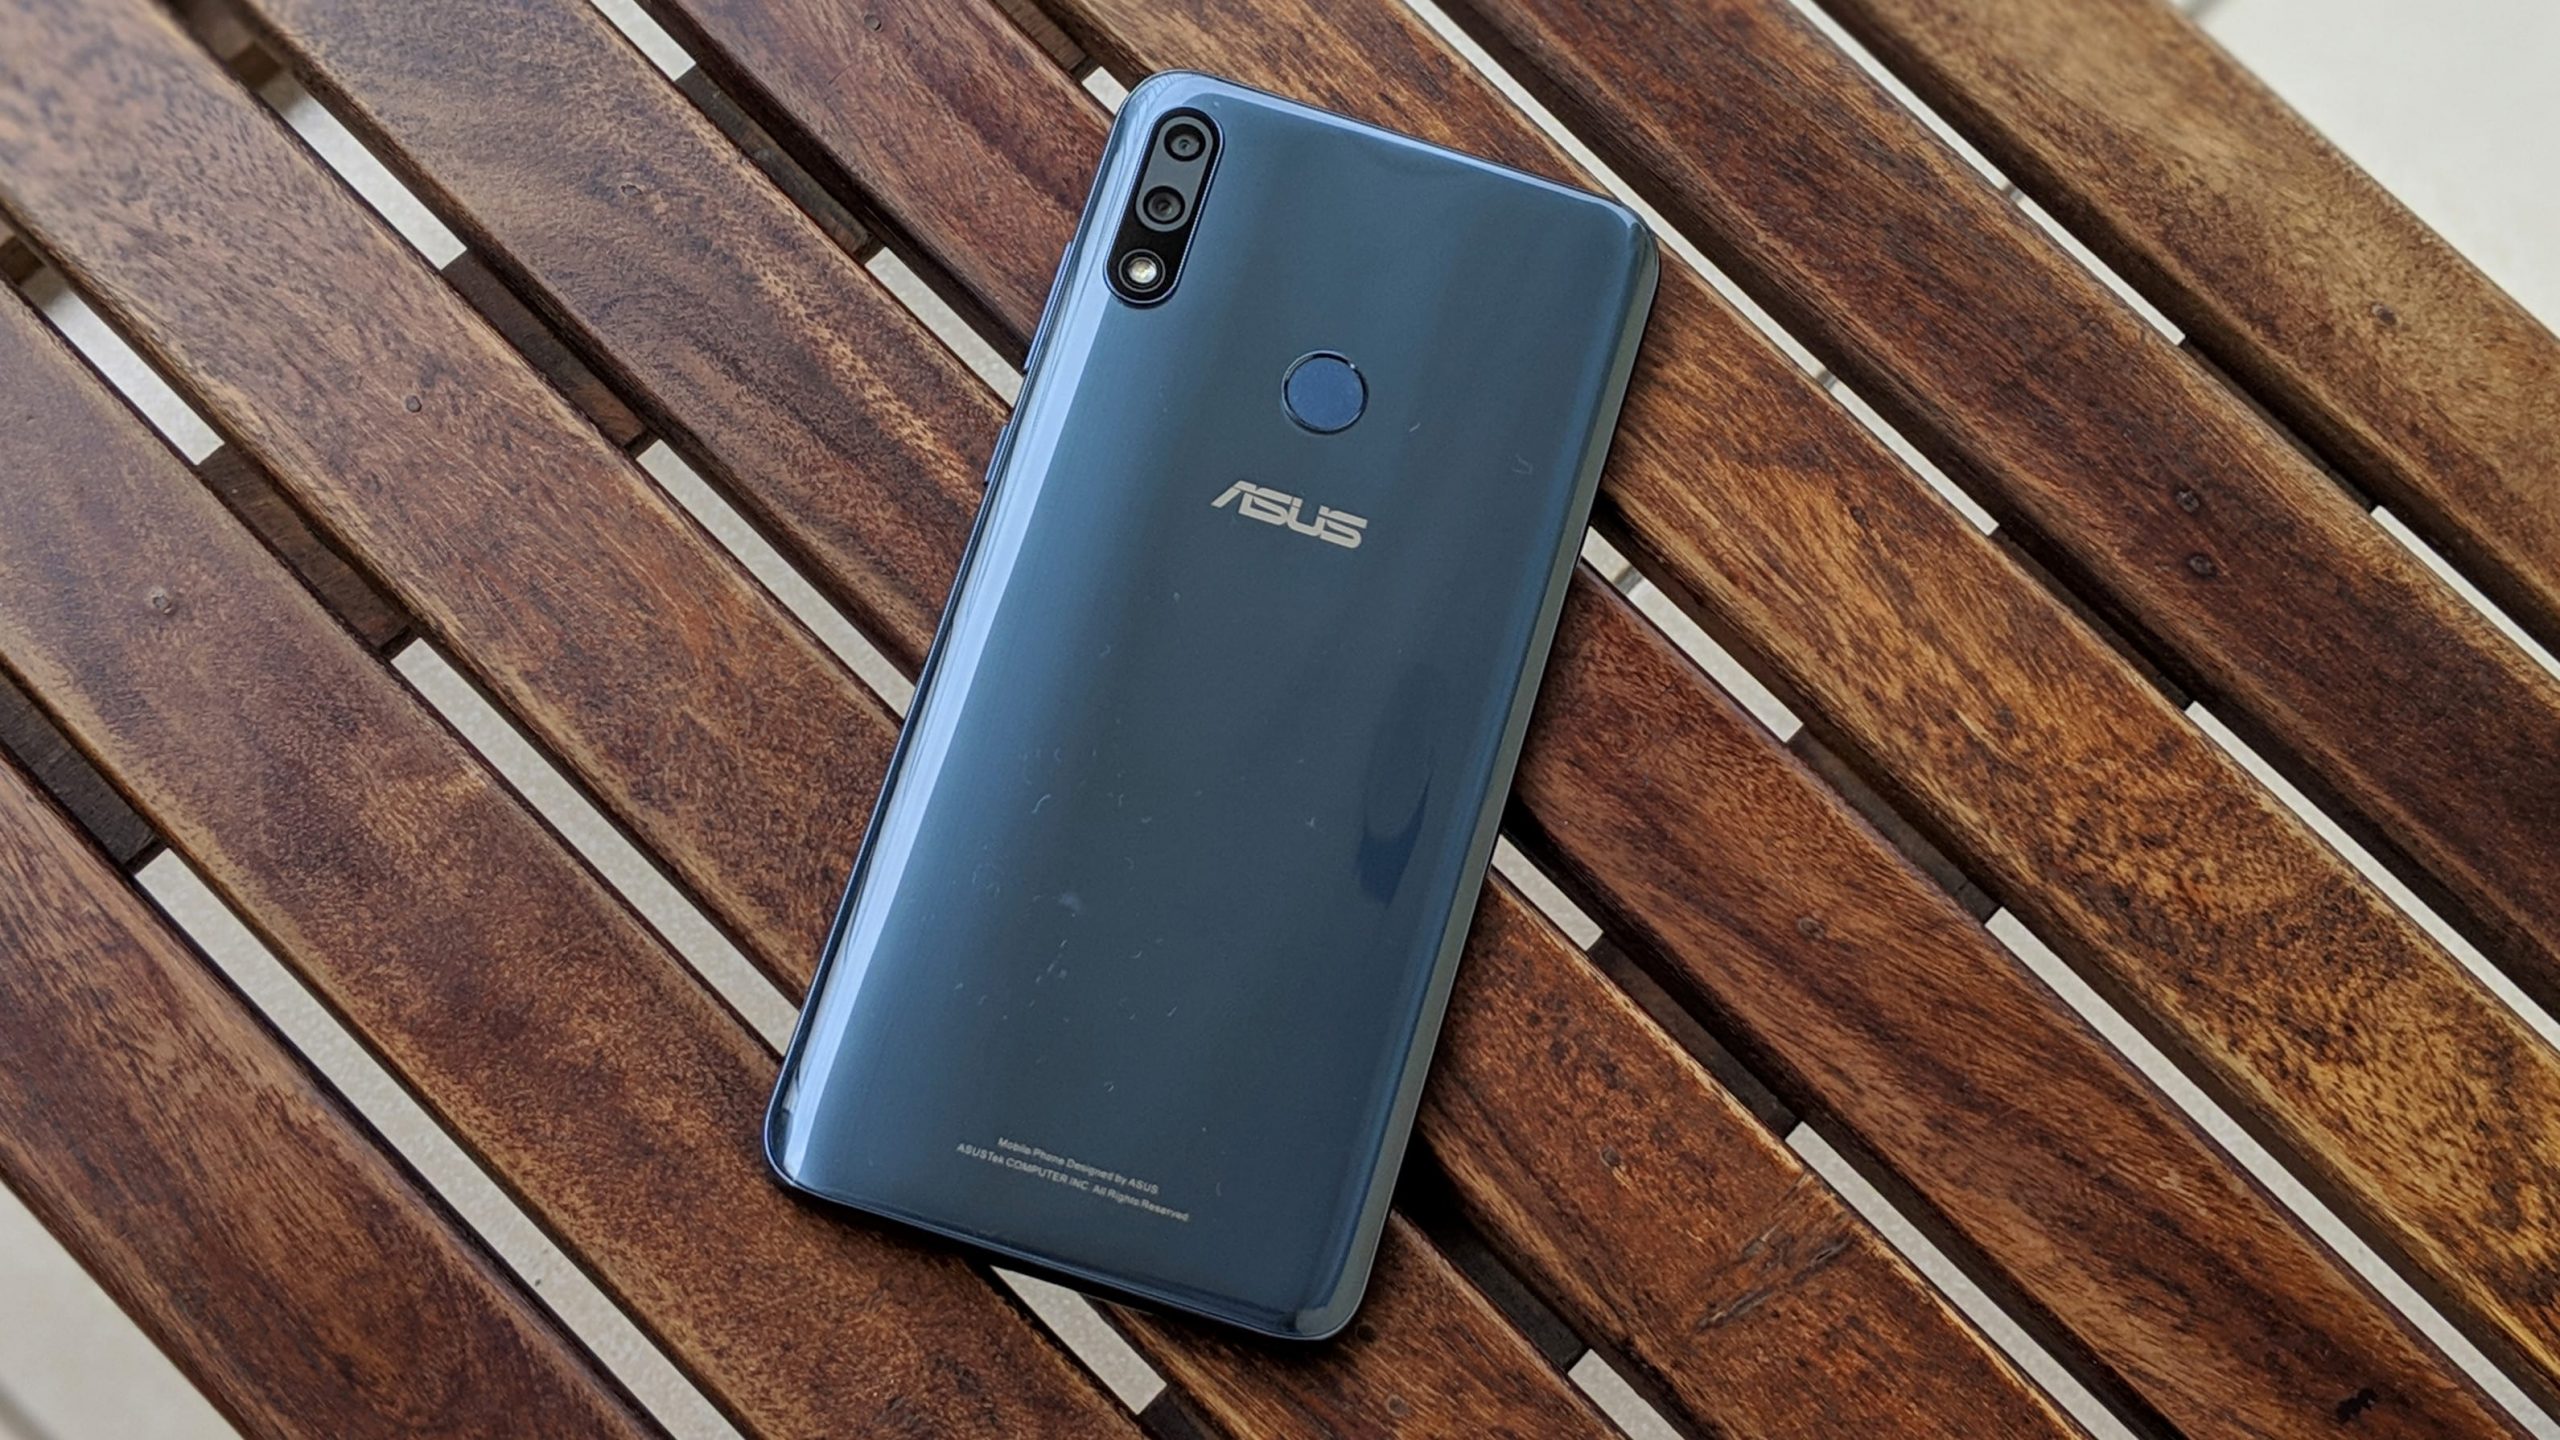 Android Pie OS update for the ZenFone Max Pro M2.